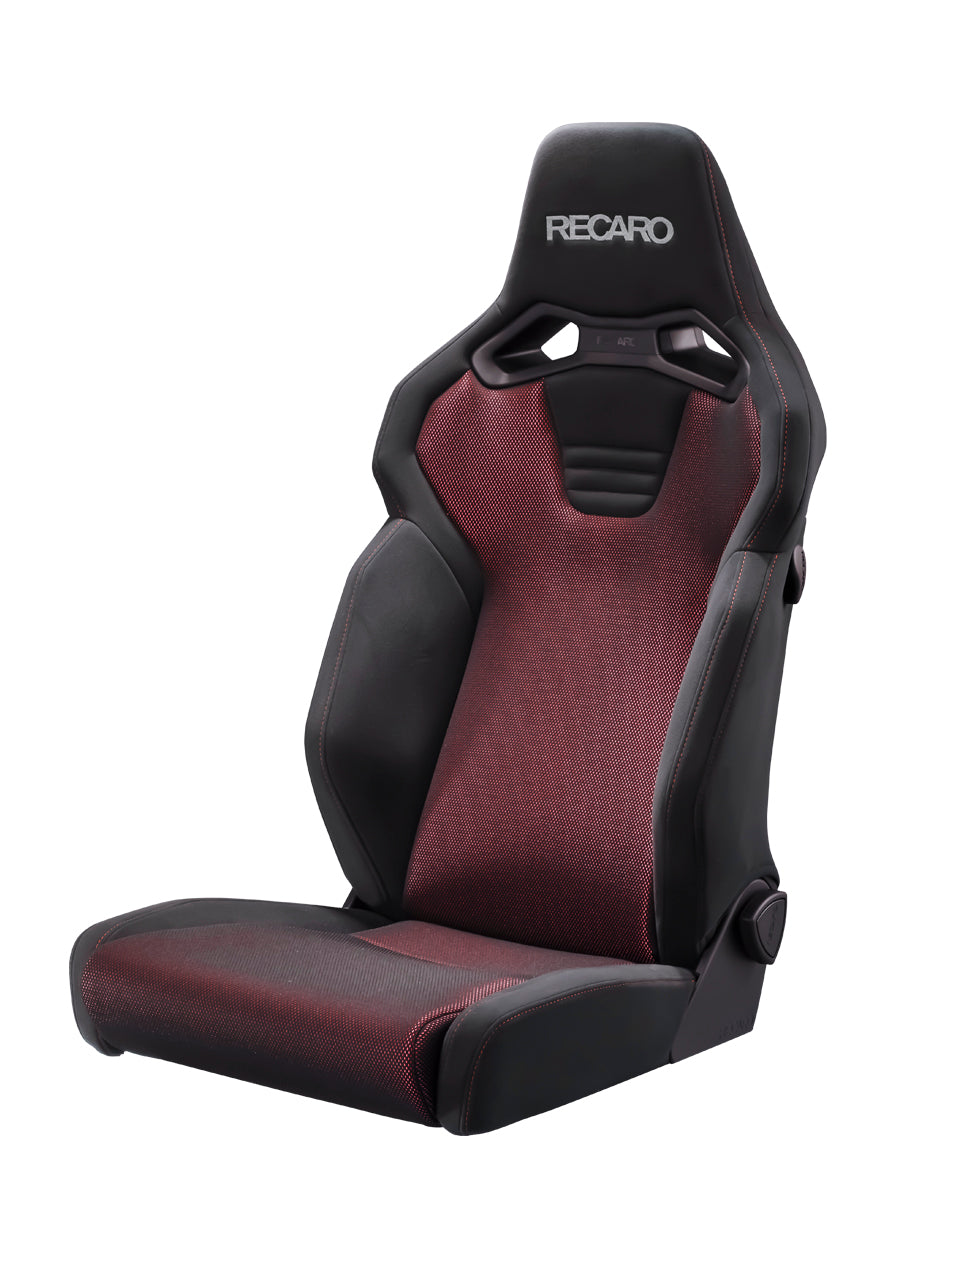 RECARO SR-C BK100H A R RD BK BRILLIANT MESH RED AND KAMUI BLACK COLOR SEAT ARMREST ATTACHEBLE WITH HEATED SEATS FOR  81-121.29.641-0